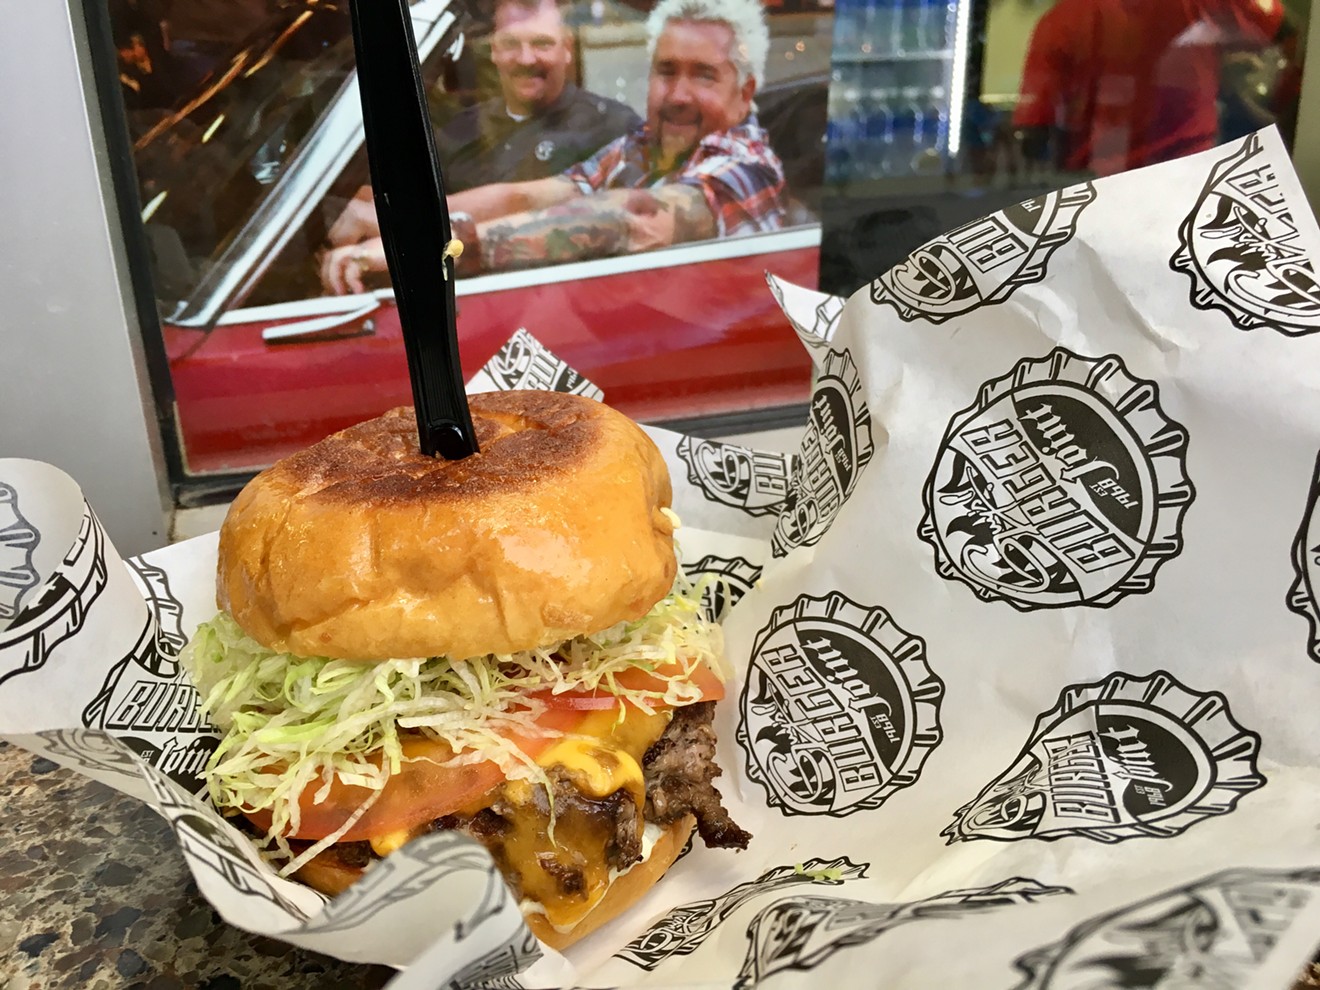 The Real Cheezy is $14 at Guy's Burger Joint at Starplex, the first Dallas-based Guy Fieri concept.